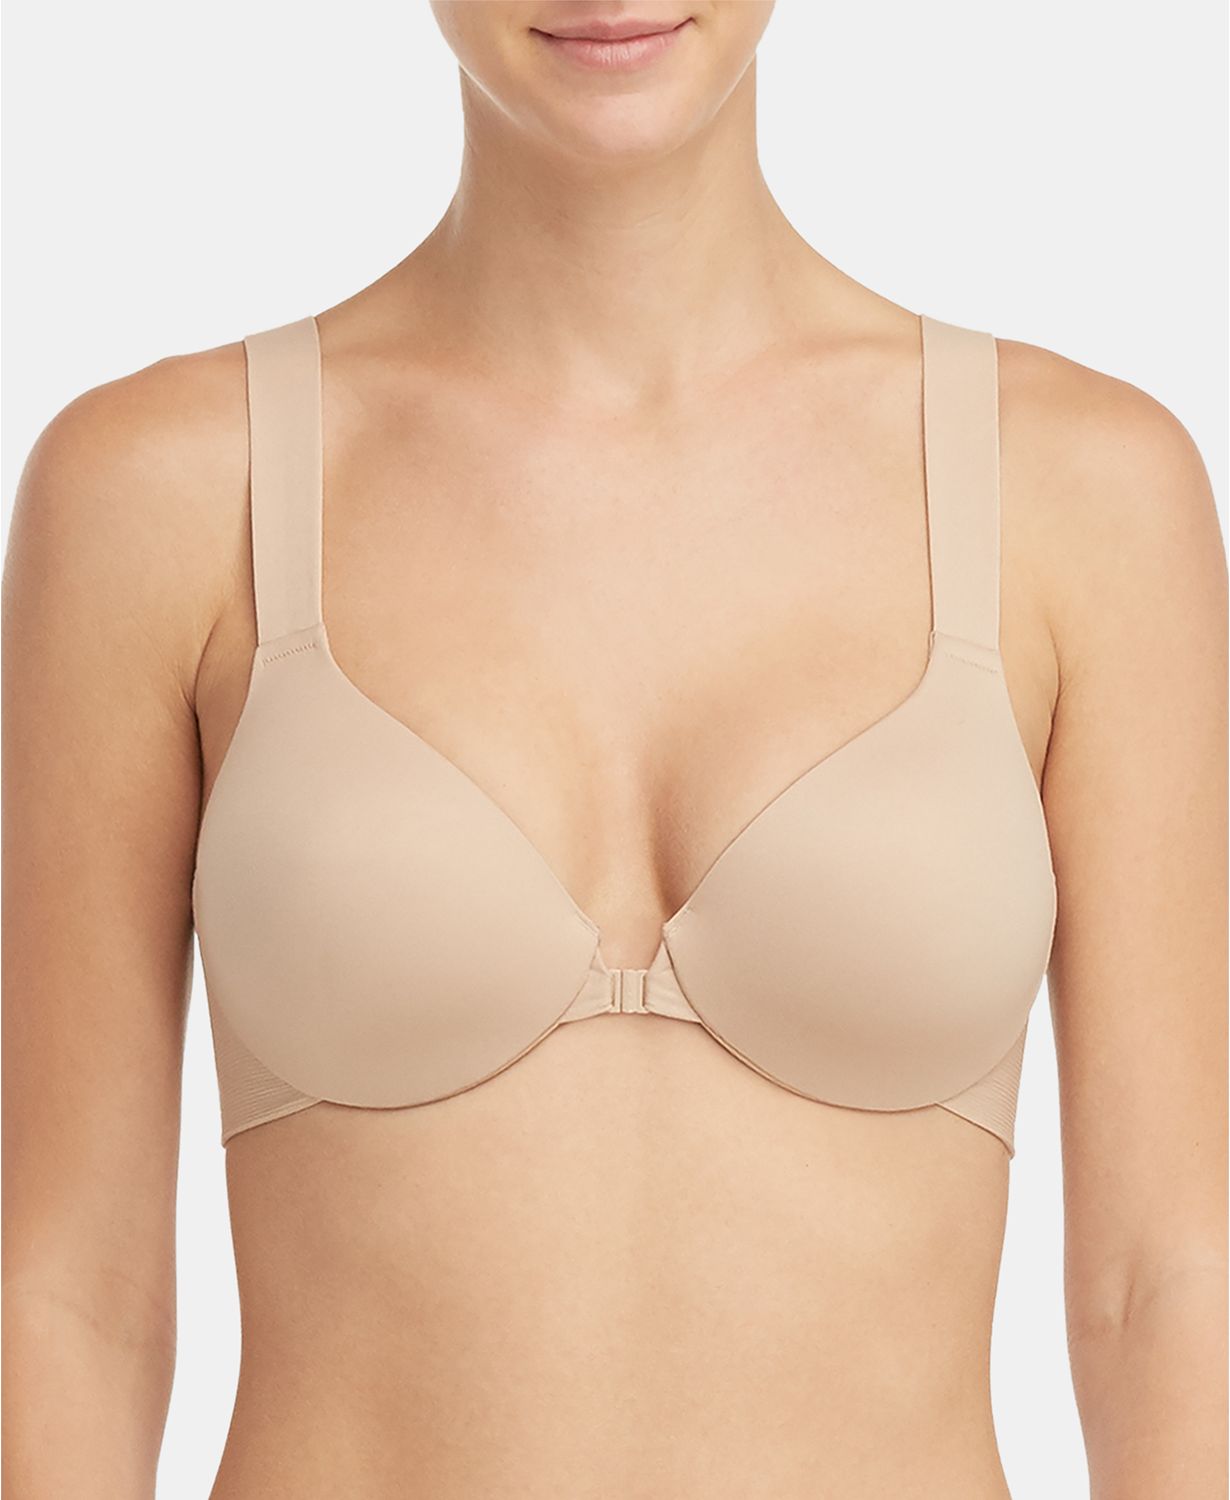 4 bra experts pick the best bras for your body type, for any occasion -  Good Morning America